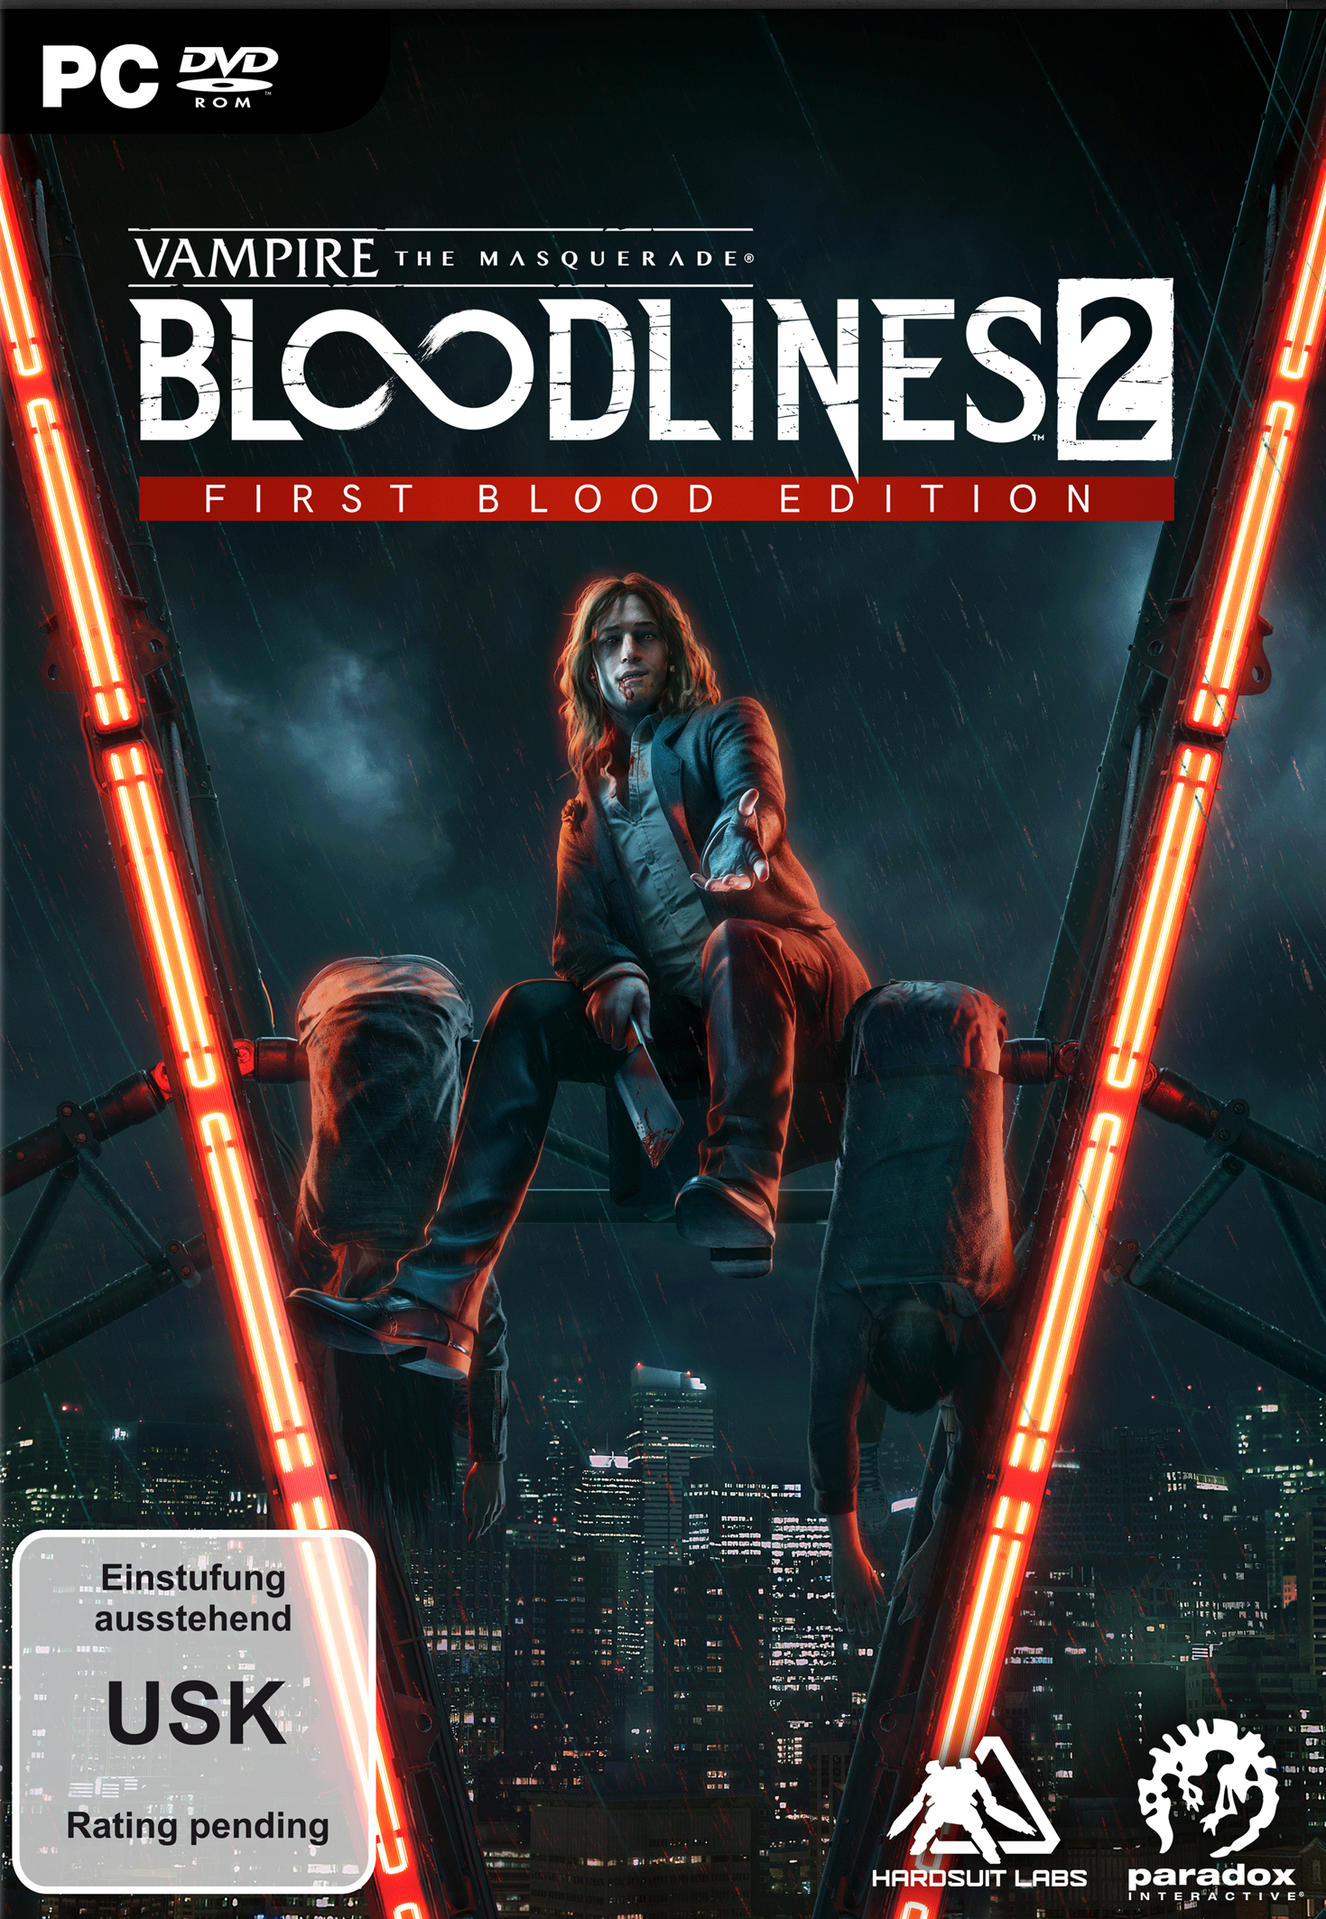 Blood Edition - [PC] Bloodlines - 2 Vampire: First The Masquerade